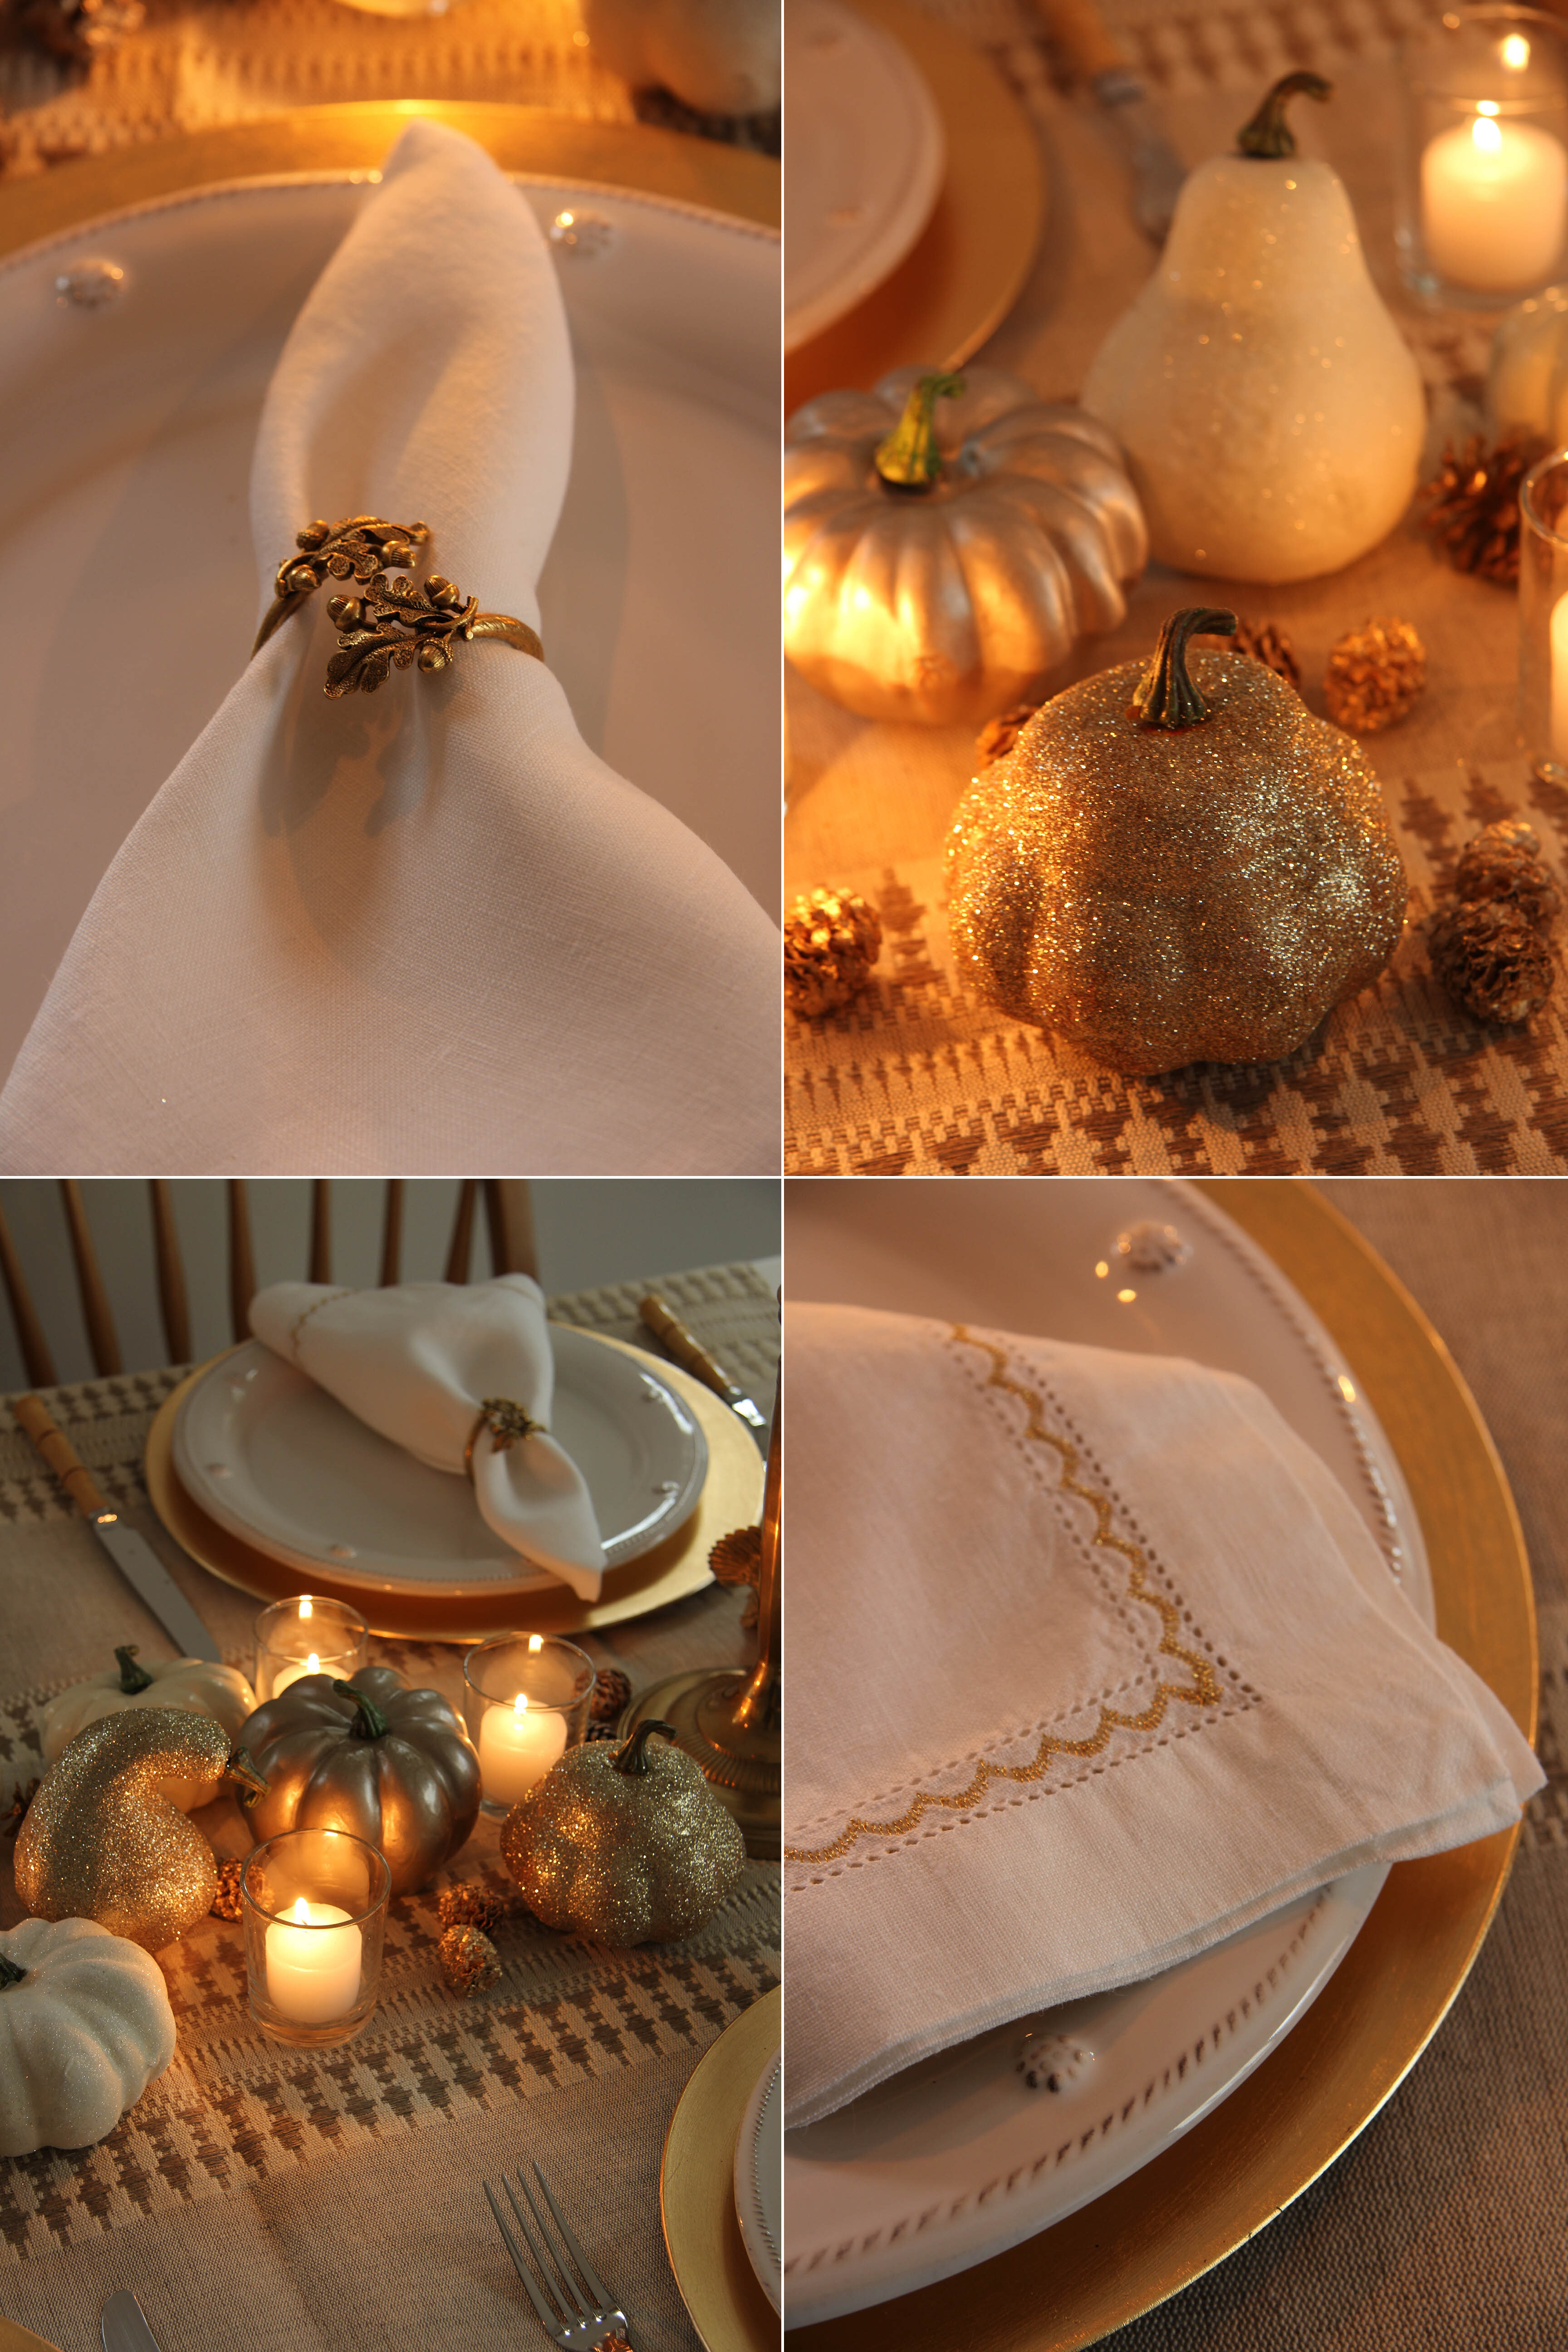 Recreate my Thanksgiving table with these easy DIY metallic and glitter gourds. Setting the table was so much fun and it looks so festive!